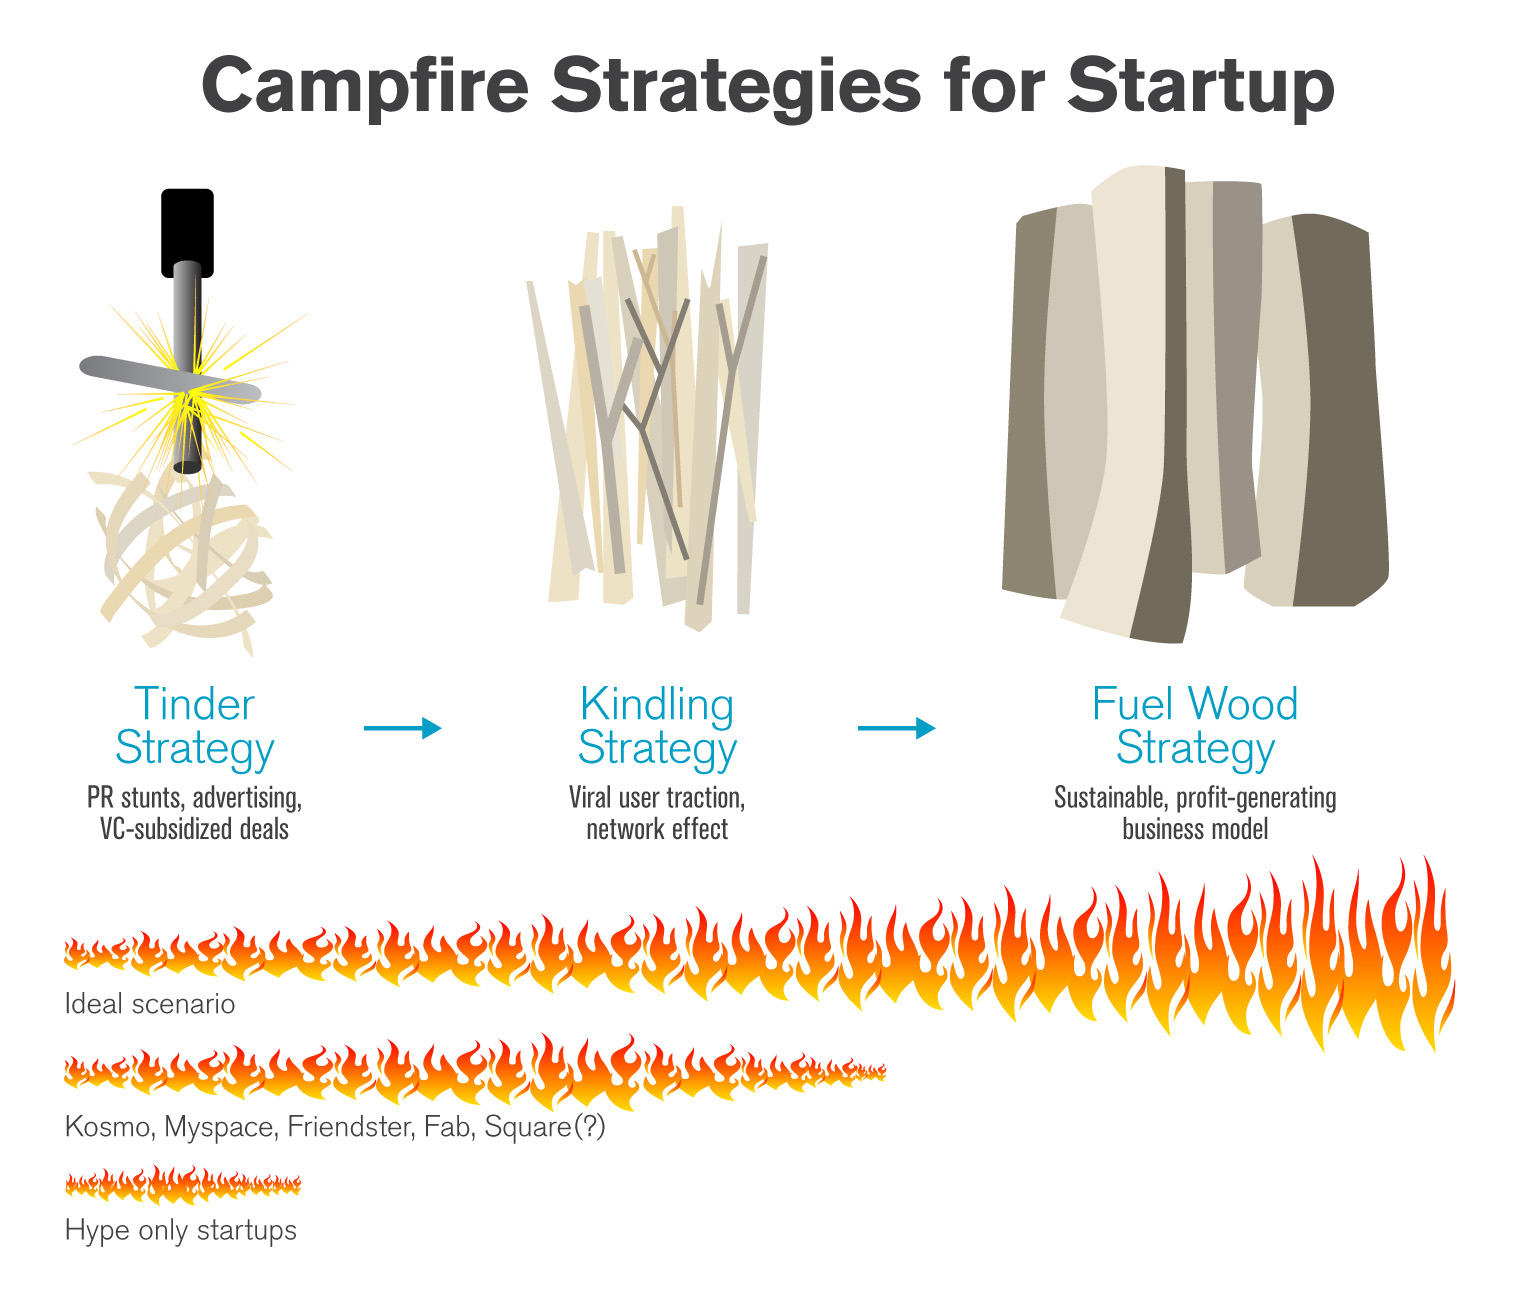 Campfire Strategies for Startup